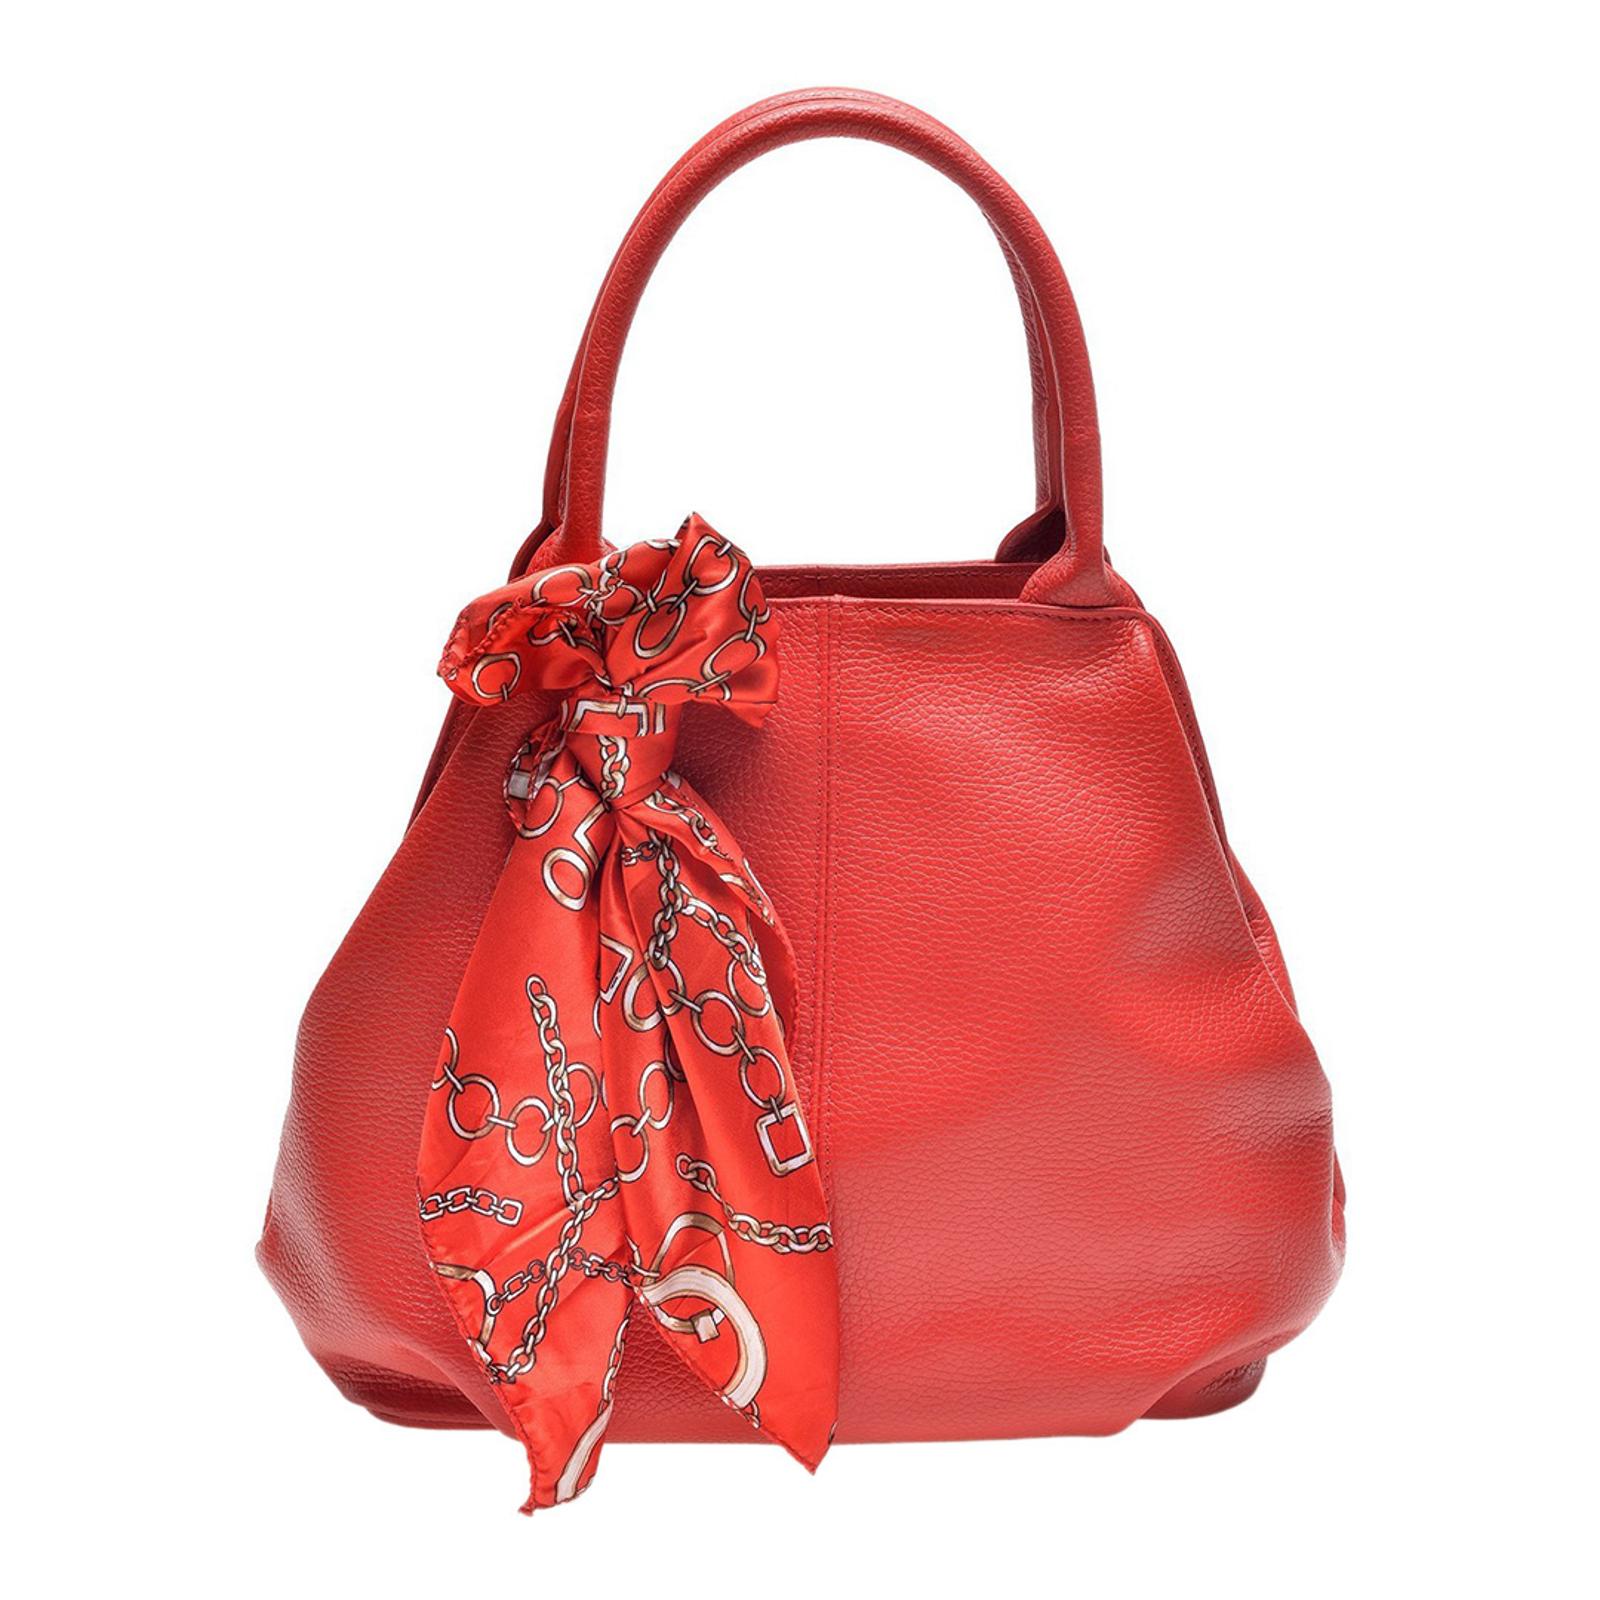 Red Leather Top Handle Bag - BrandAlley